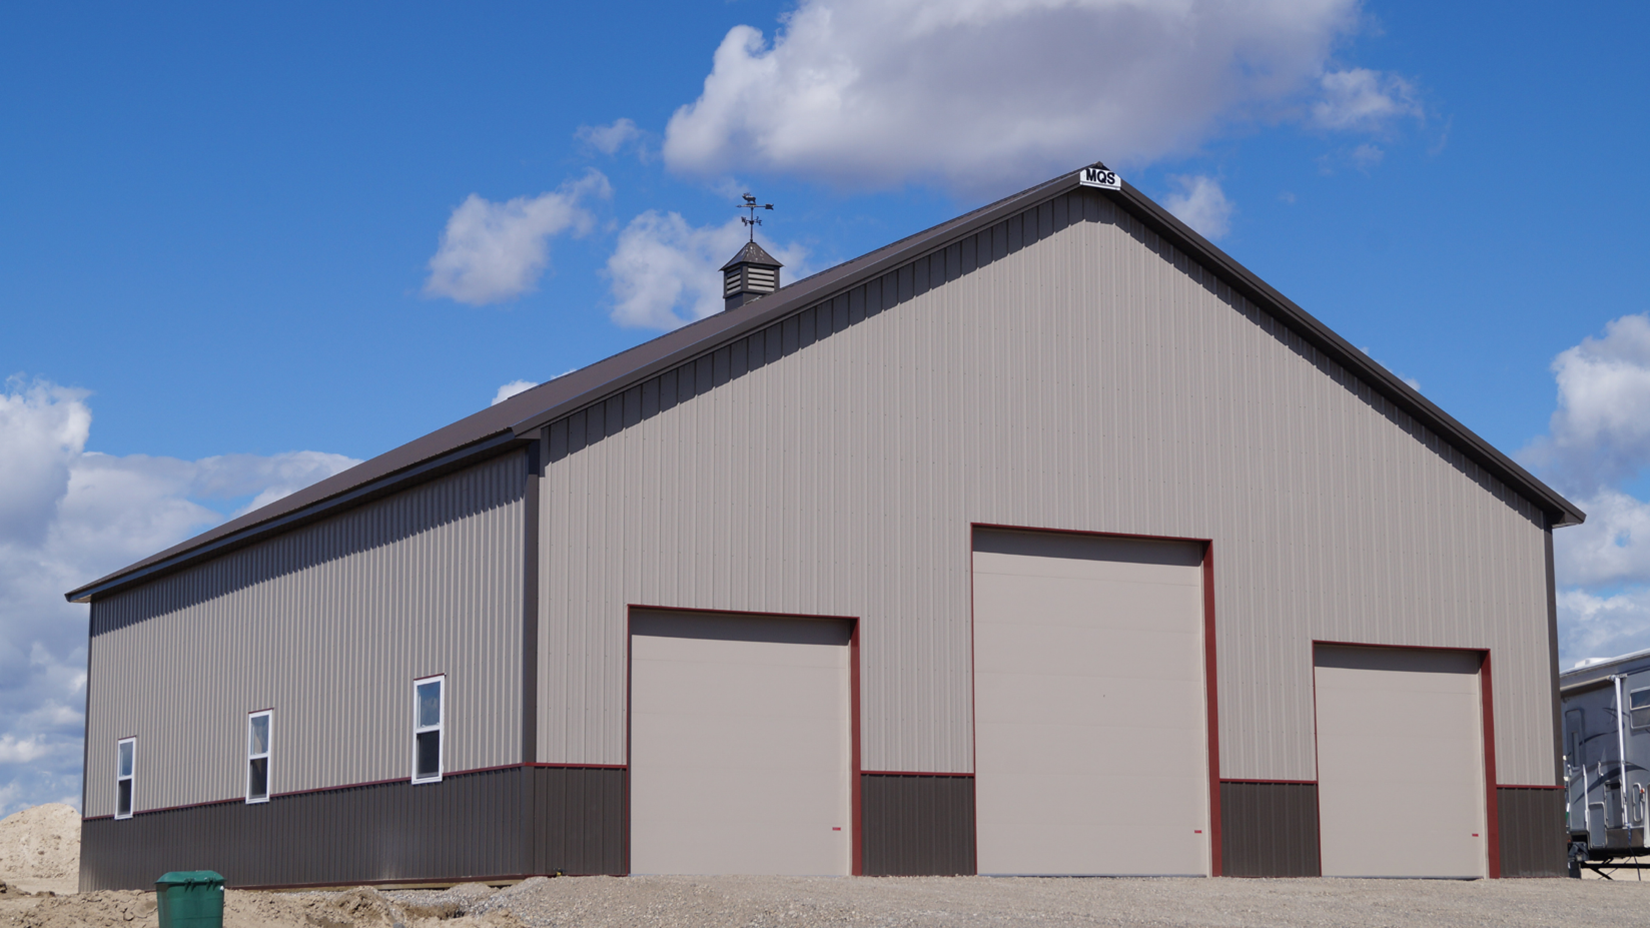 What Makes MQS, Inc. Stand Out Over Other Companies That Build Montana Garages?